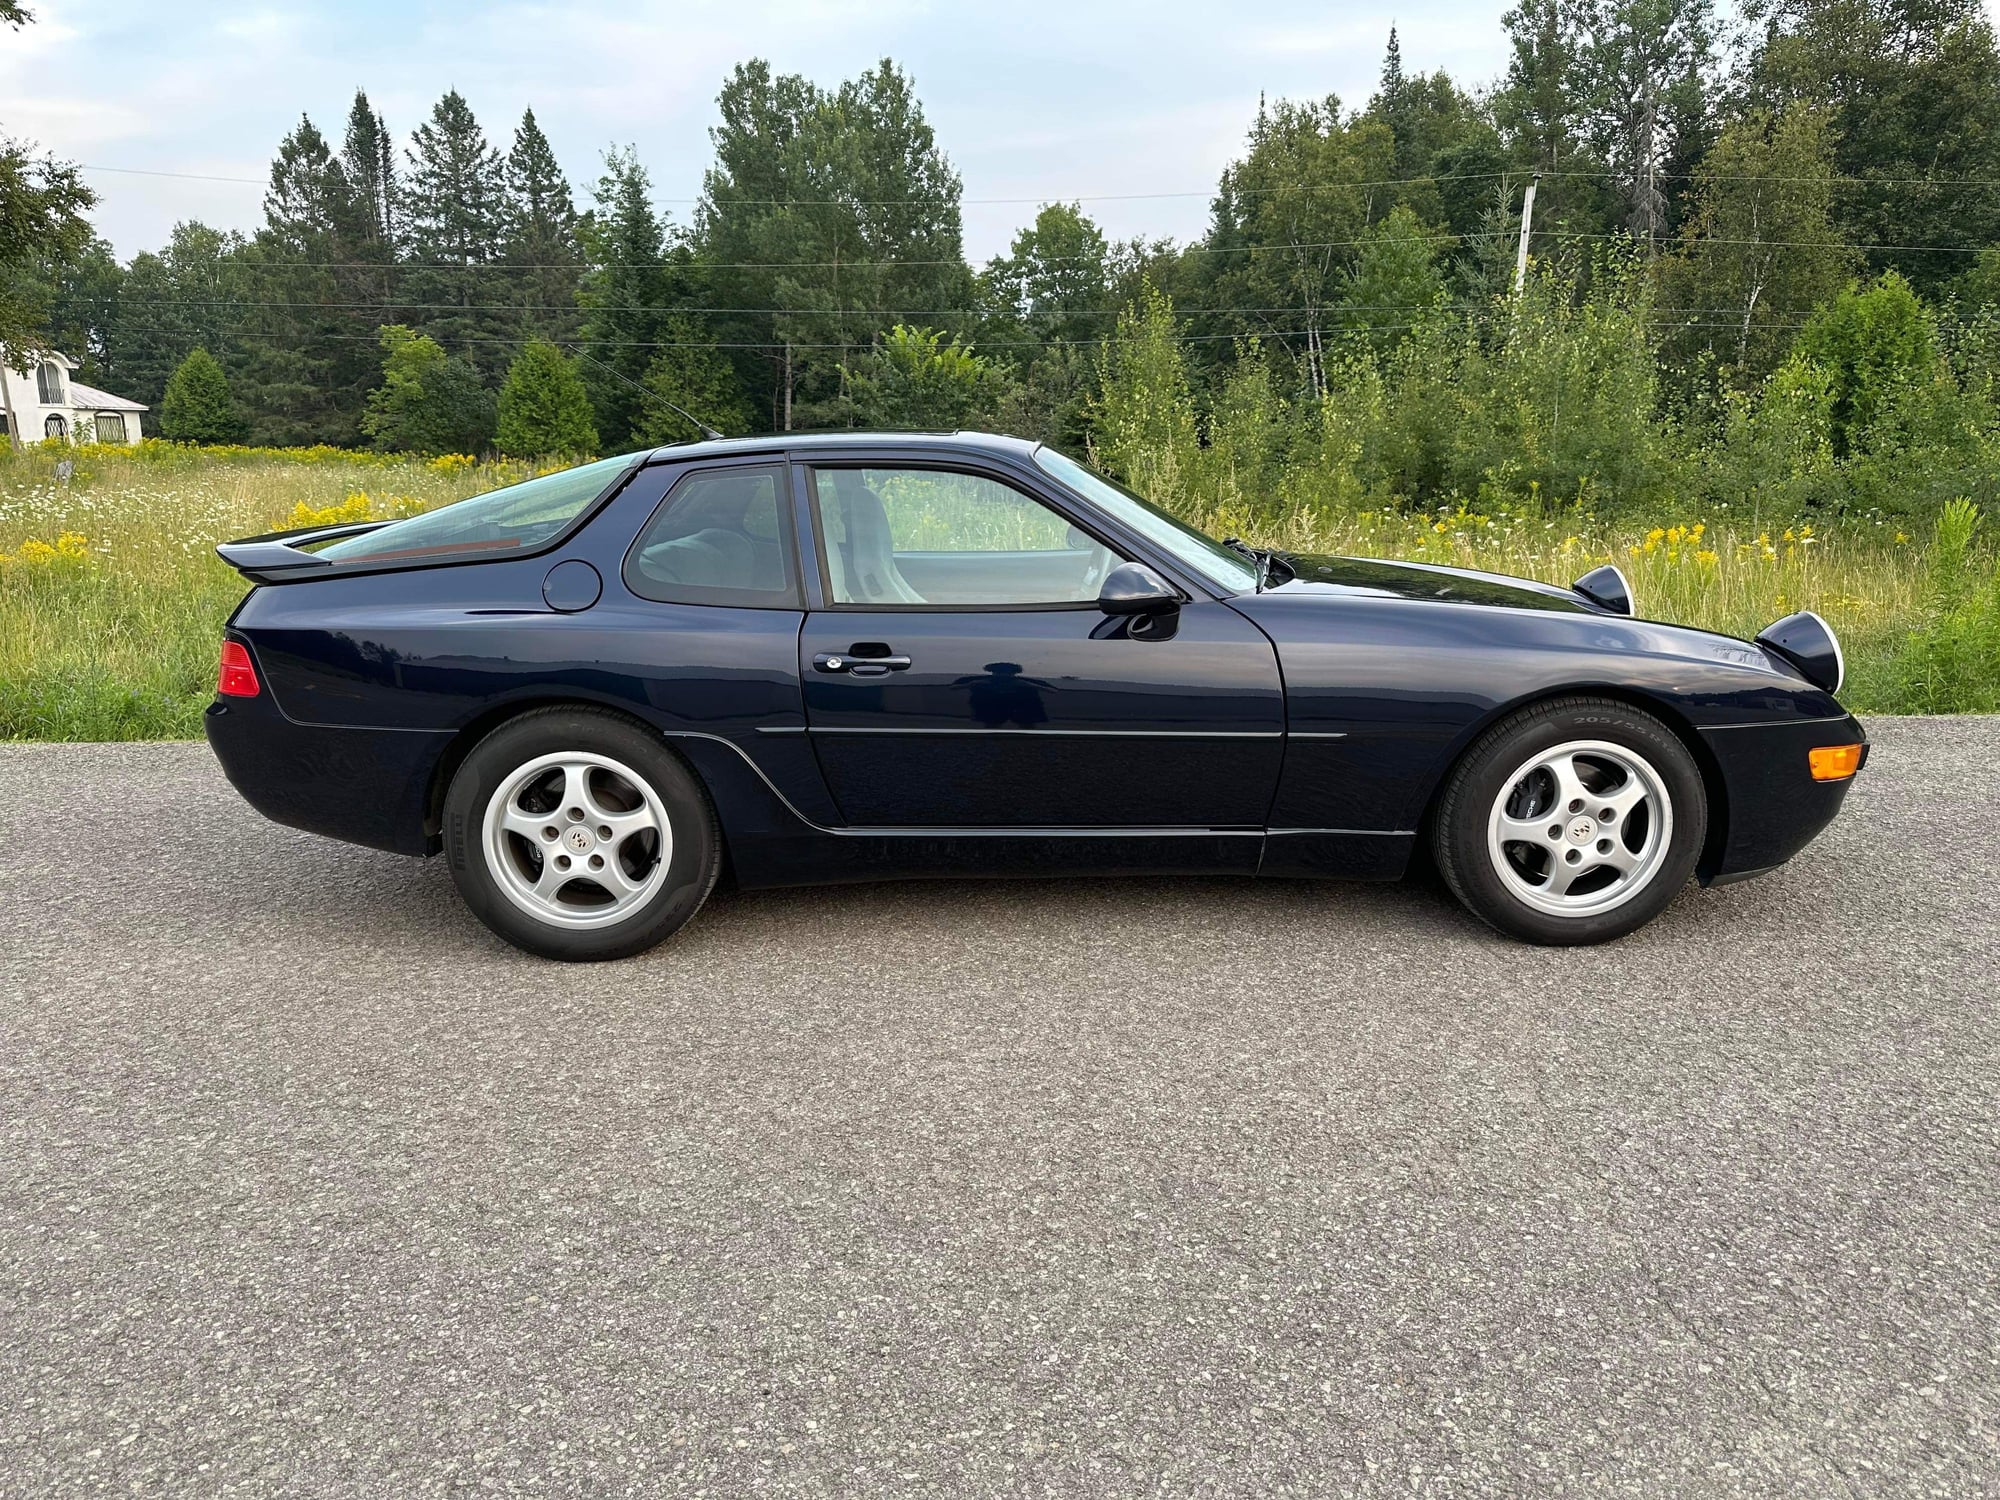 1994 Porsche 968 - 1994 Porsche 968 Coupe Manual - Used - VIN WP0AA2966RS820248 - 114,000 Miles - 4 cyl - 2WD - Manual - Coupe - Blue - Champlain, NY 12919, United States